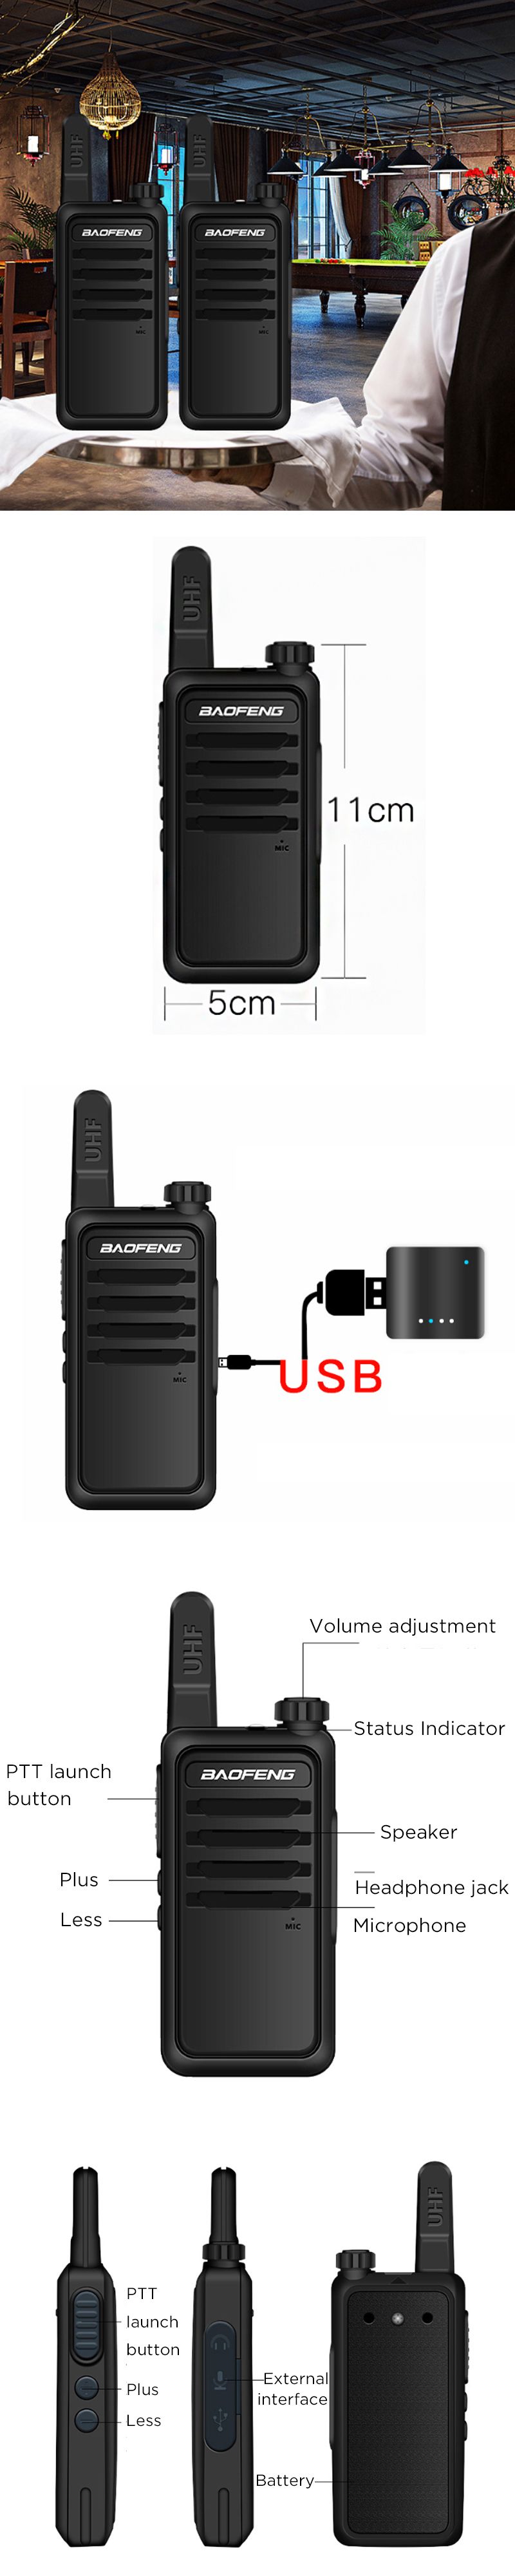 Baofeng-BF-512-5W-400-470MHz-Frequency-16-Channels-USB-Rechargable-Mini-Handheld-Radio-Walkie-Talkie-1576815